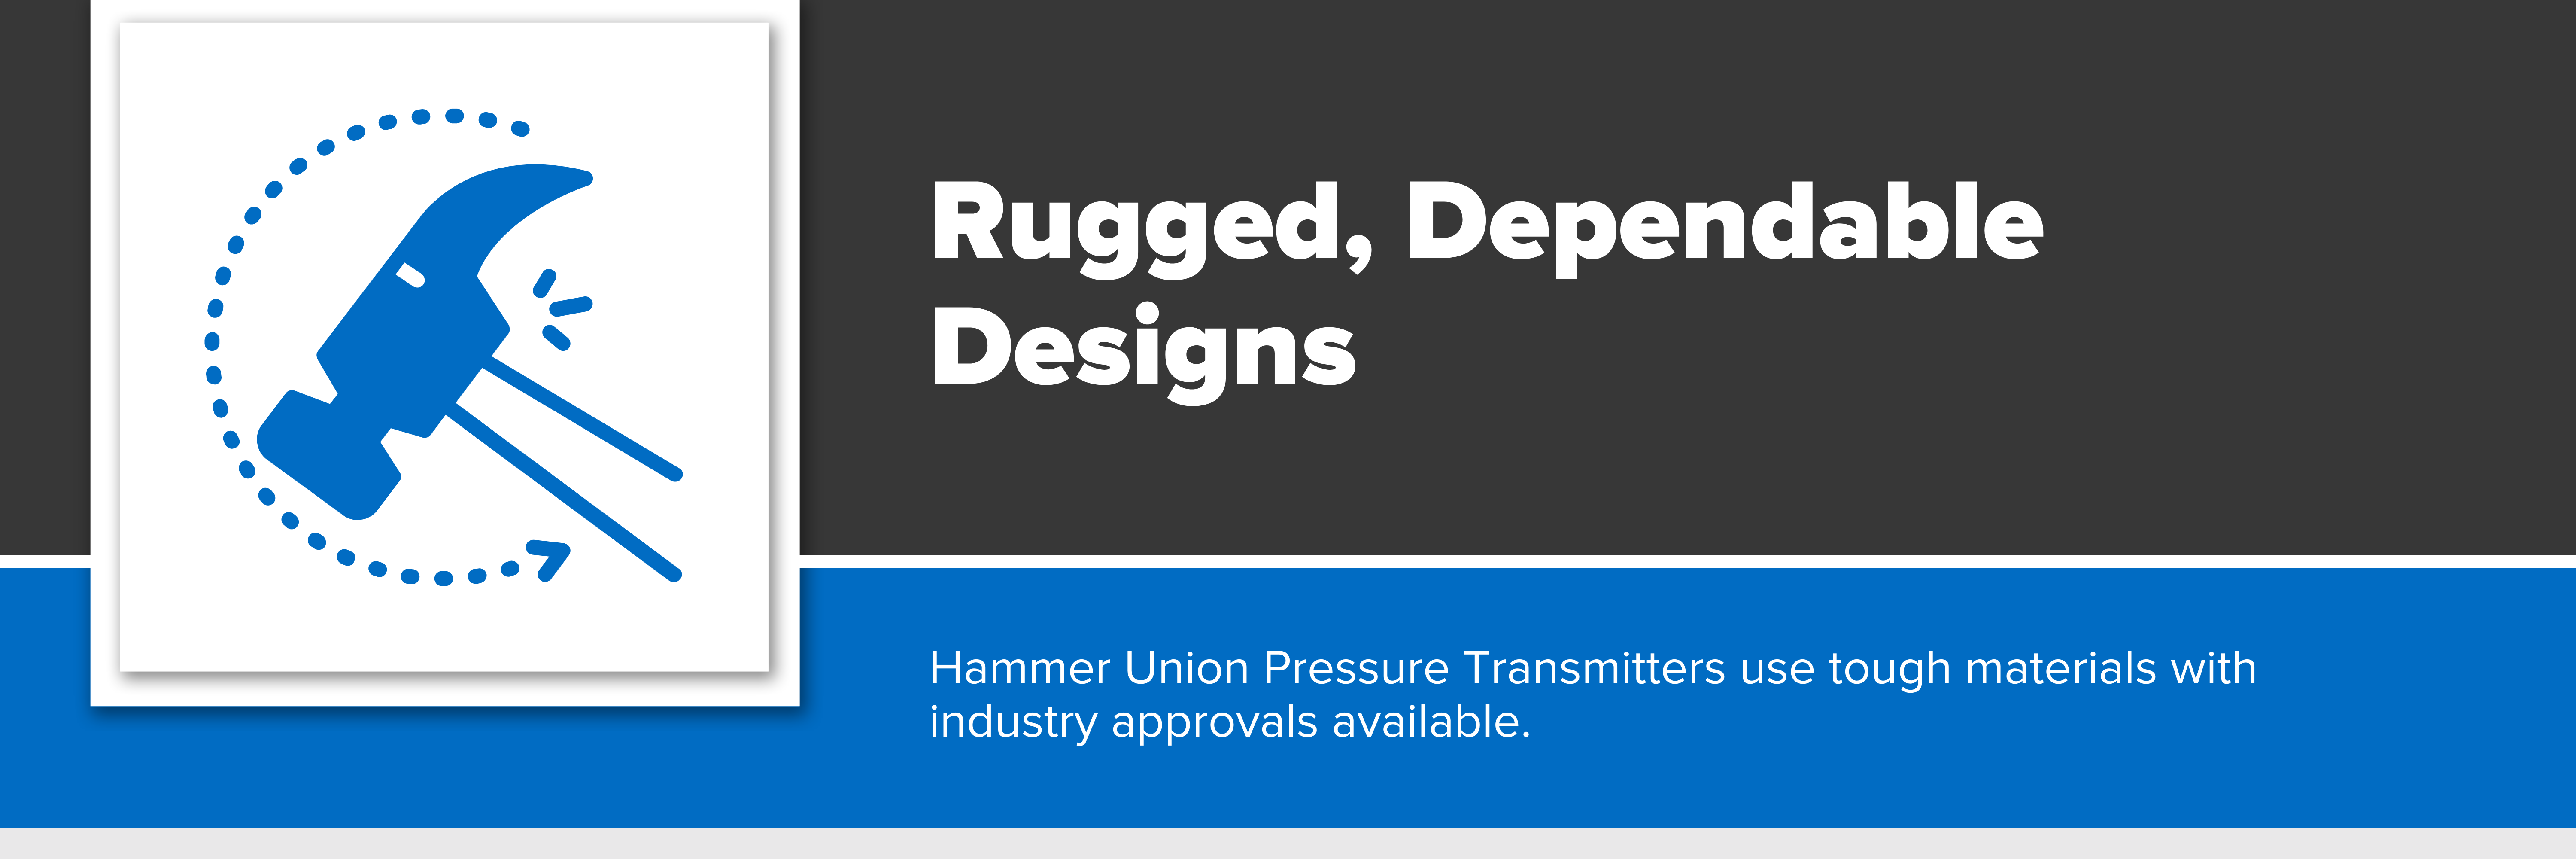 Header image with text "Rugged, Dependable, Designs"